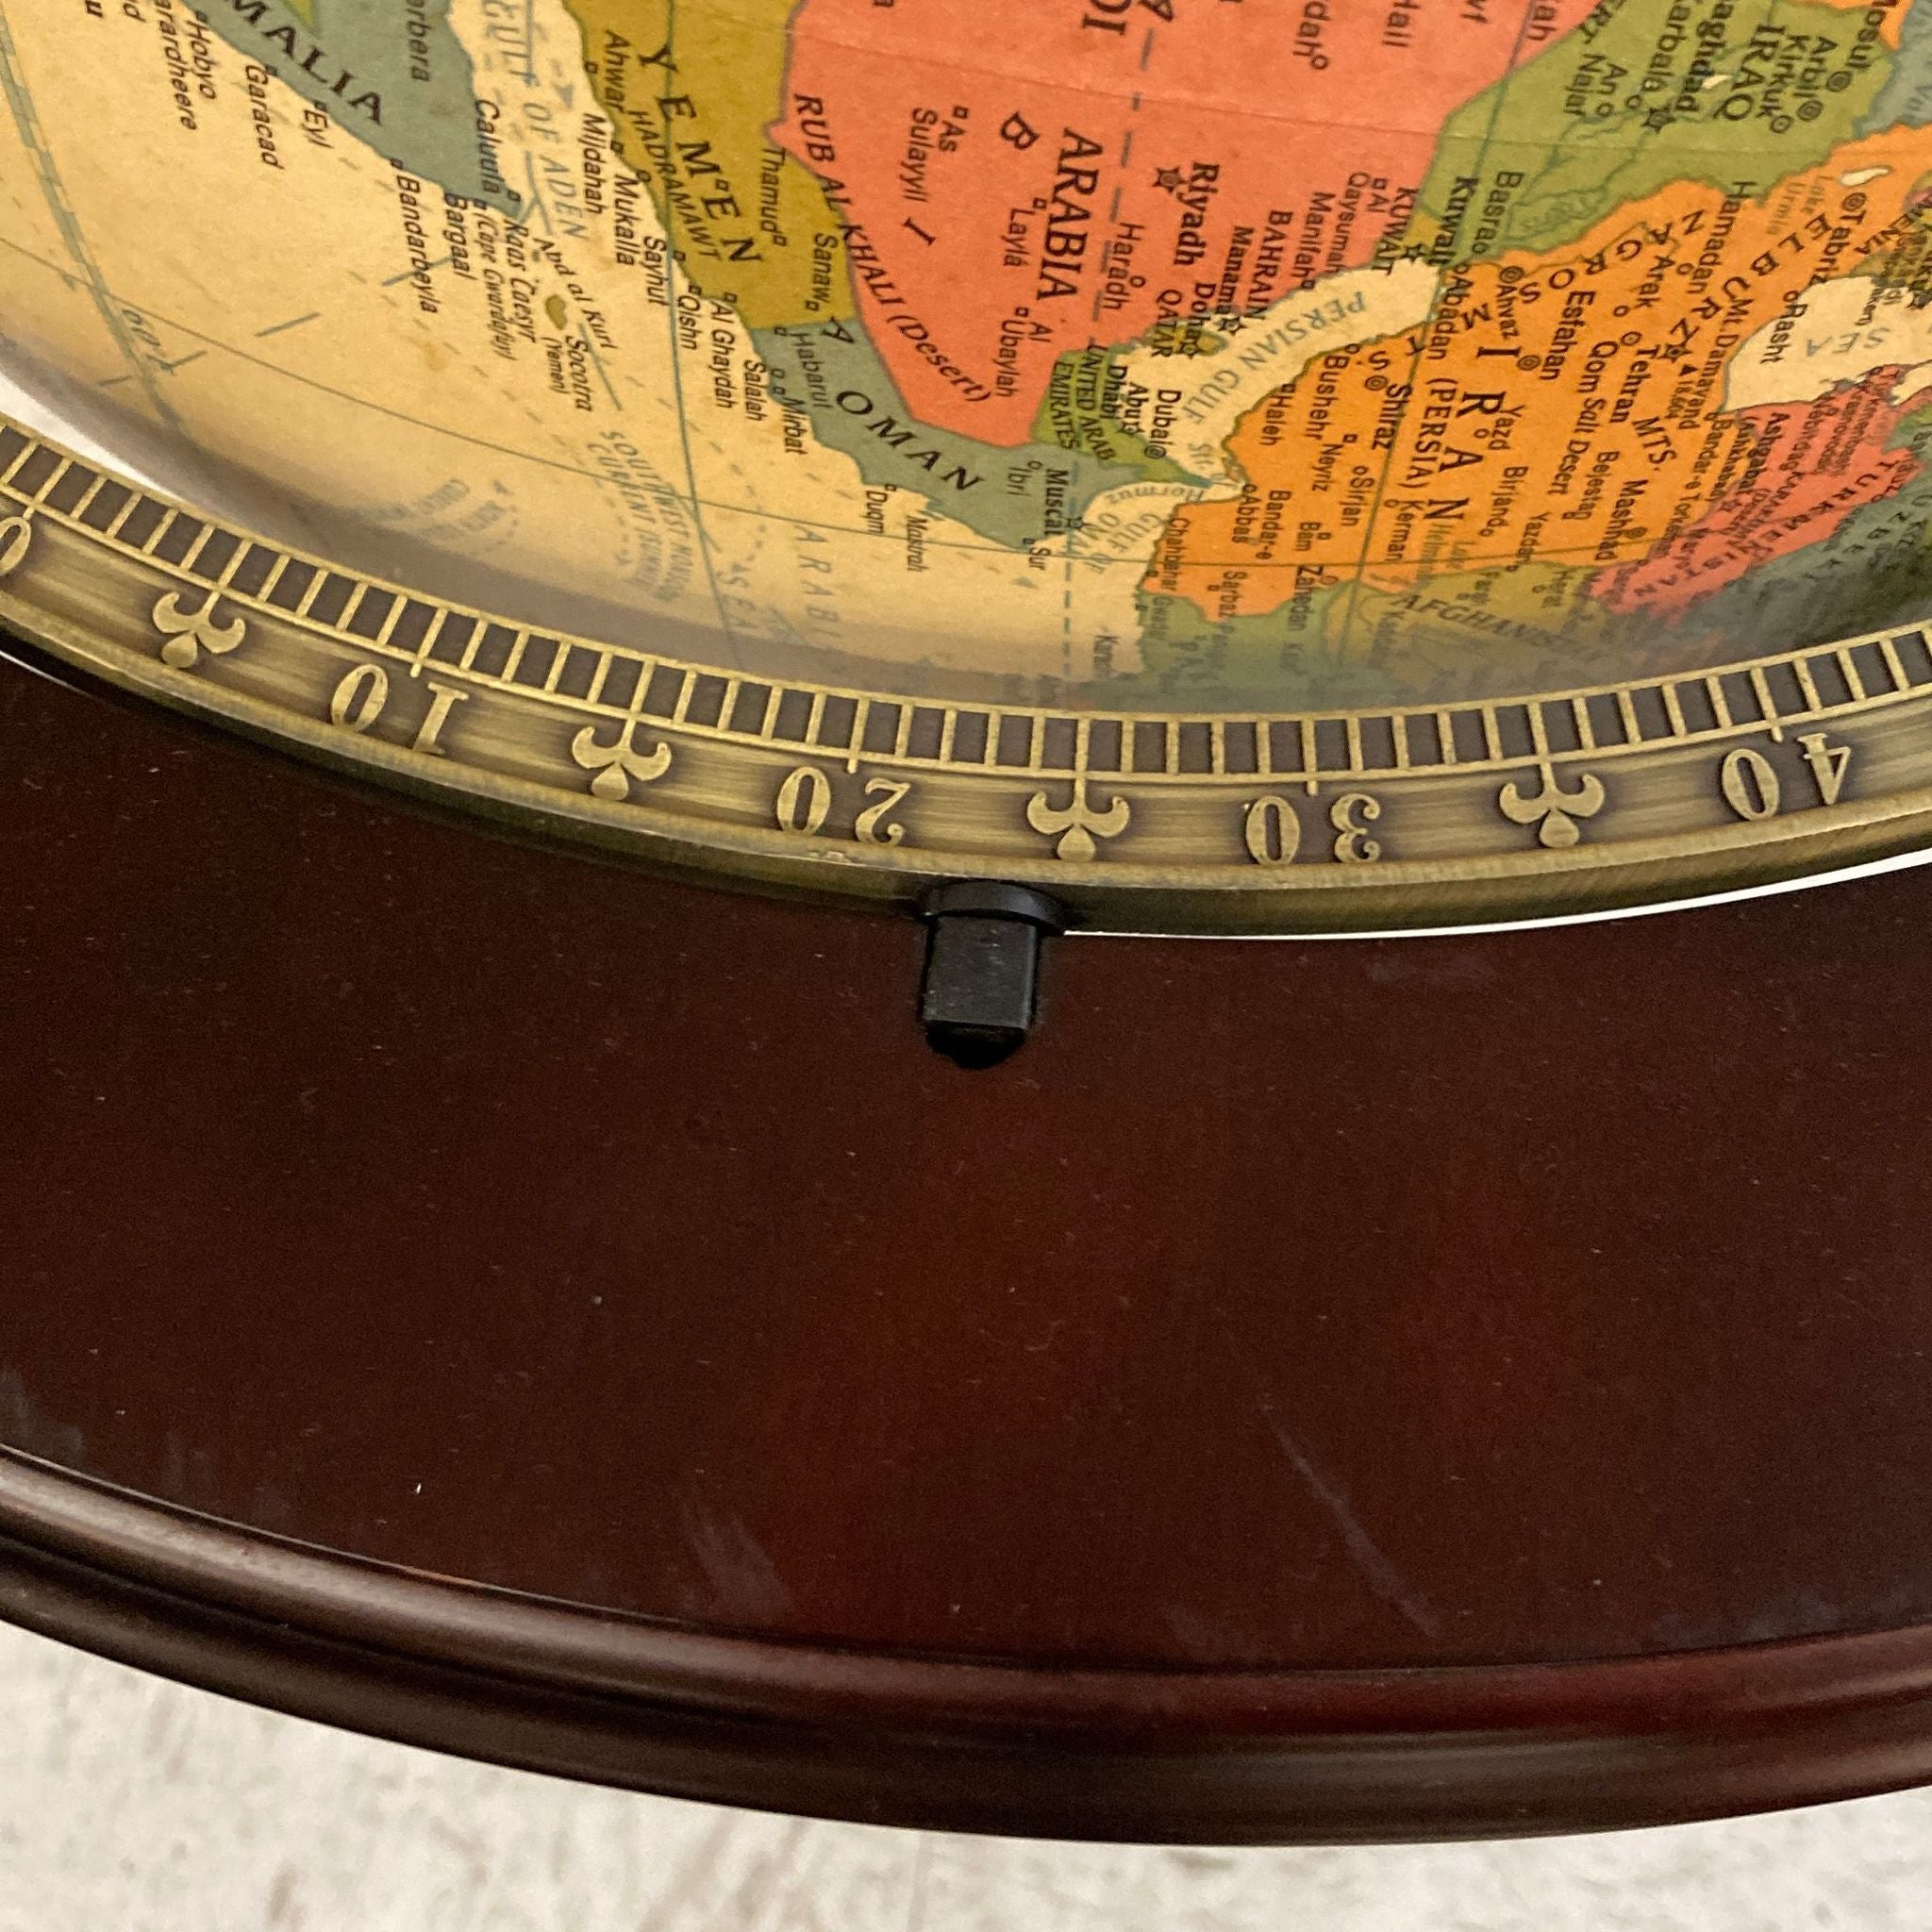 Close-up of antique illuminated globe on cherry wood stand showing detailed map and graduated meridian scale.